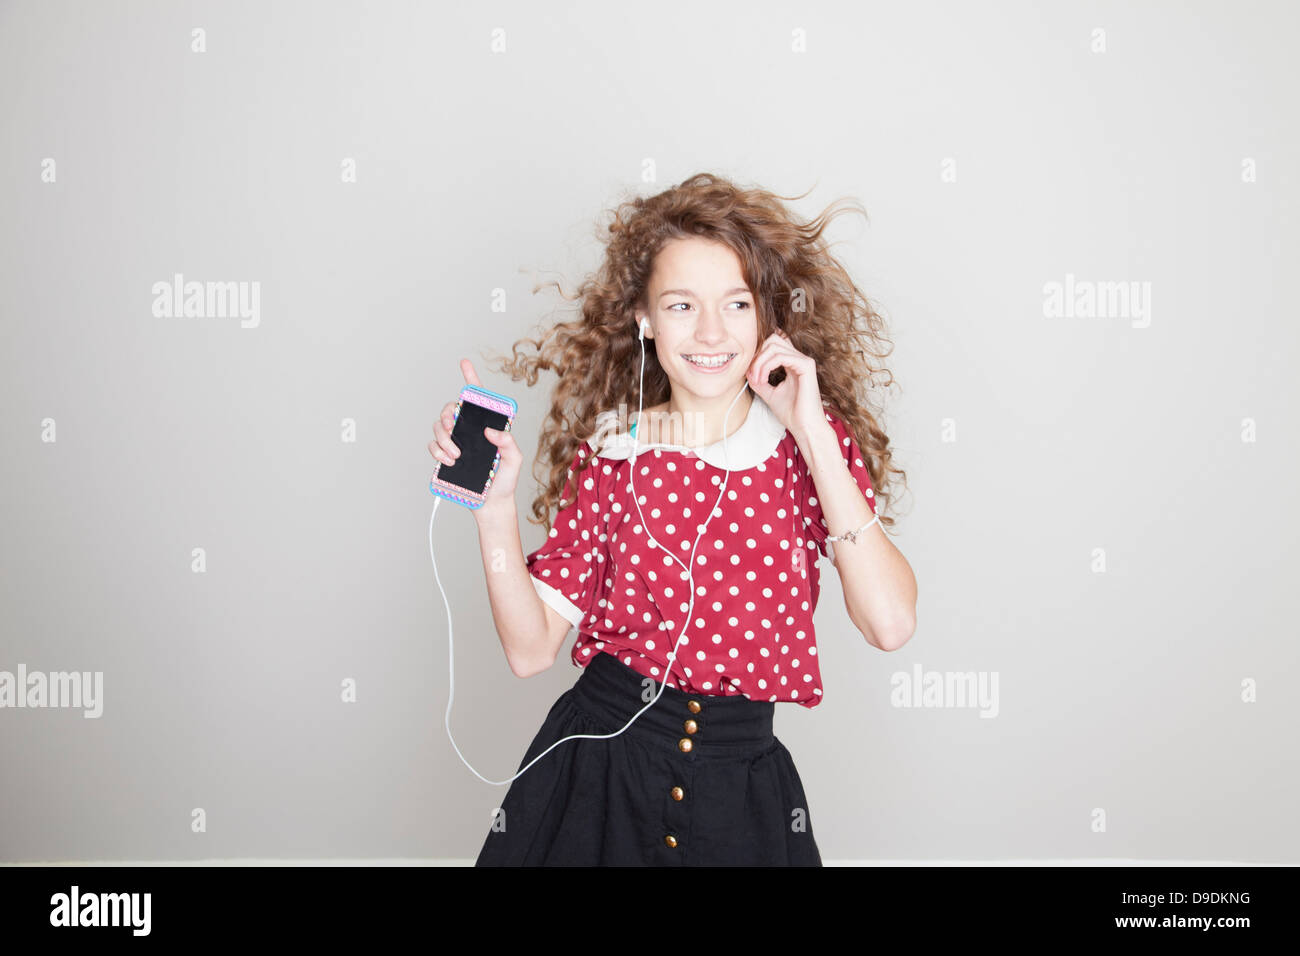 Girl wearing headphones, dancing and holding mp3 player Stock Photo